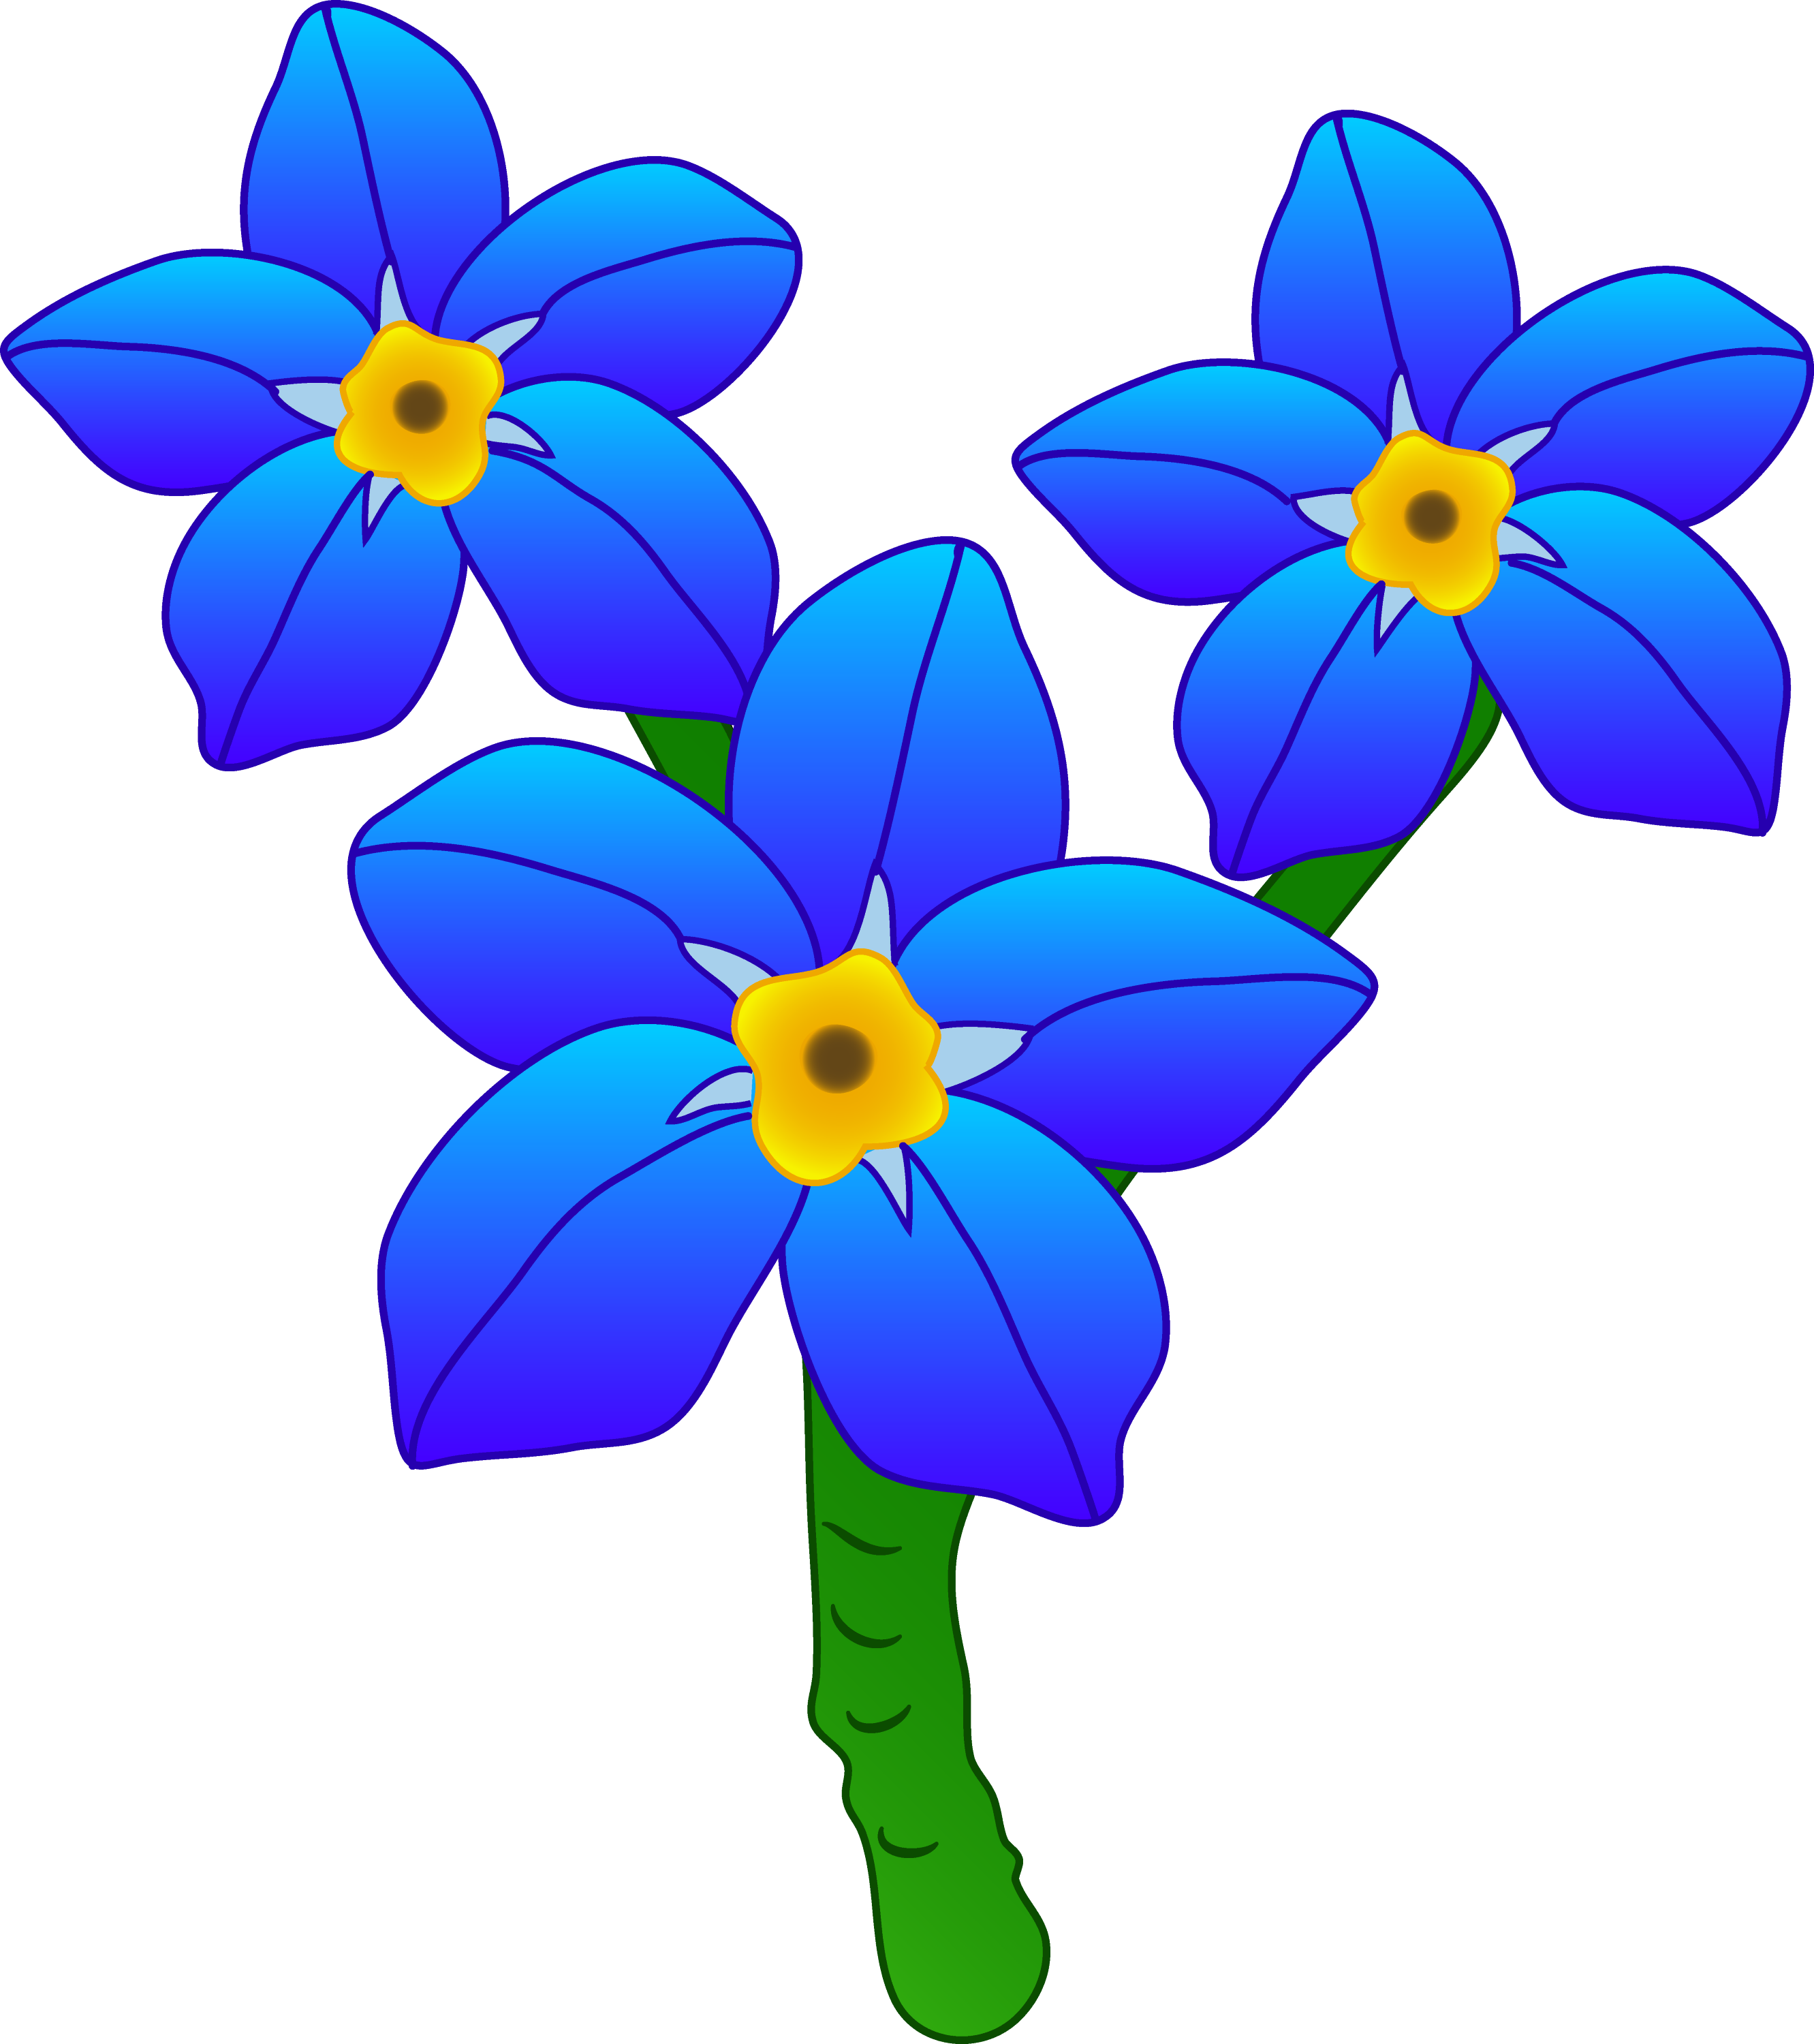 clip art forget me not flower - photo #12